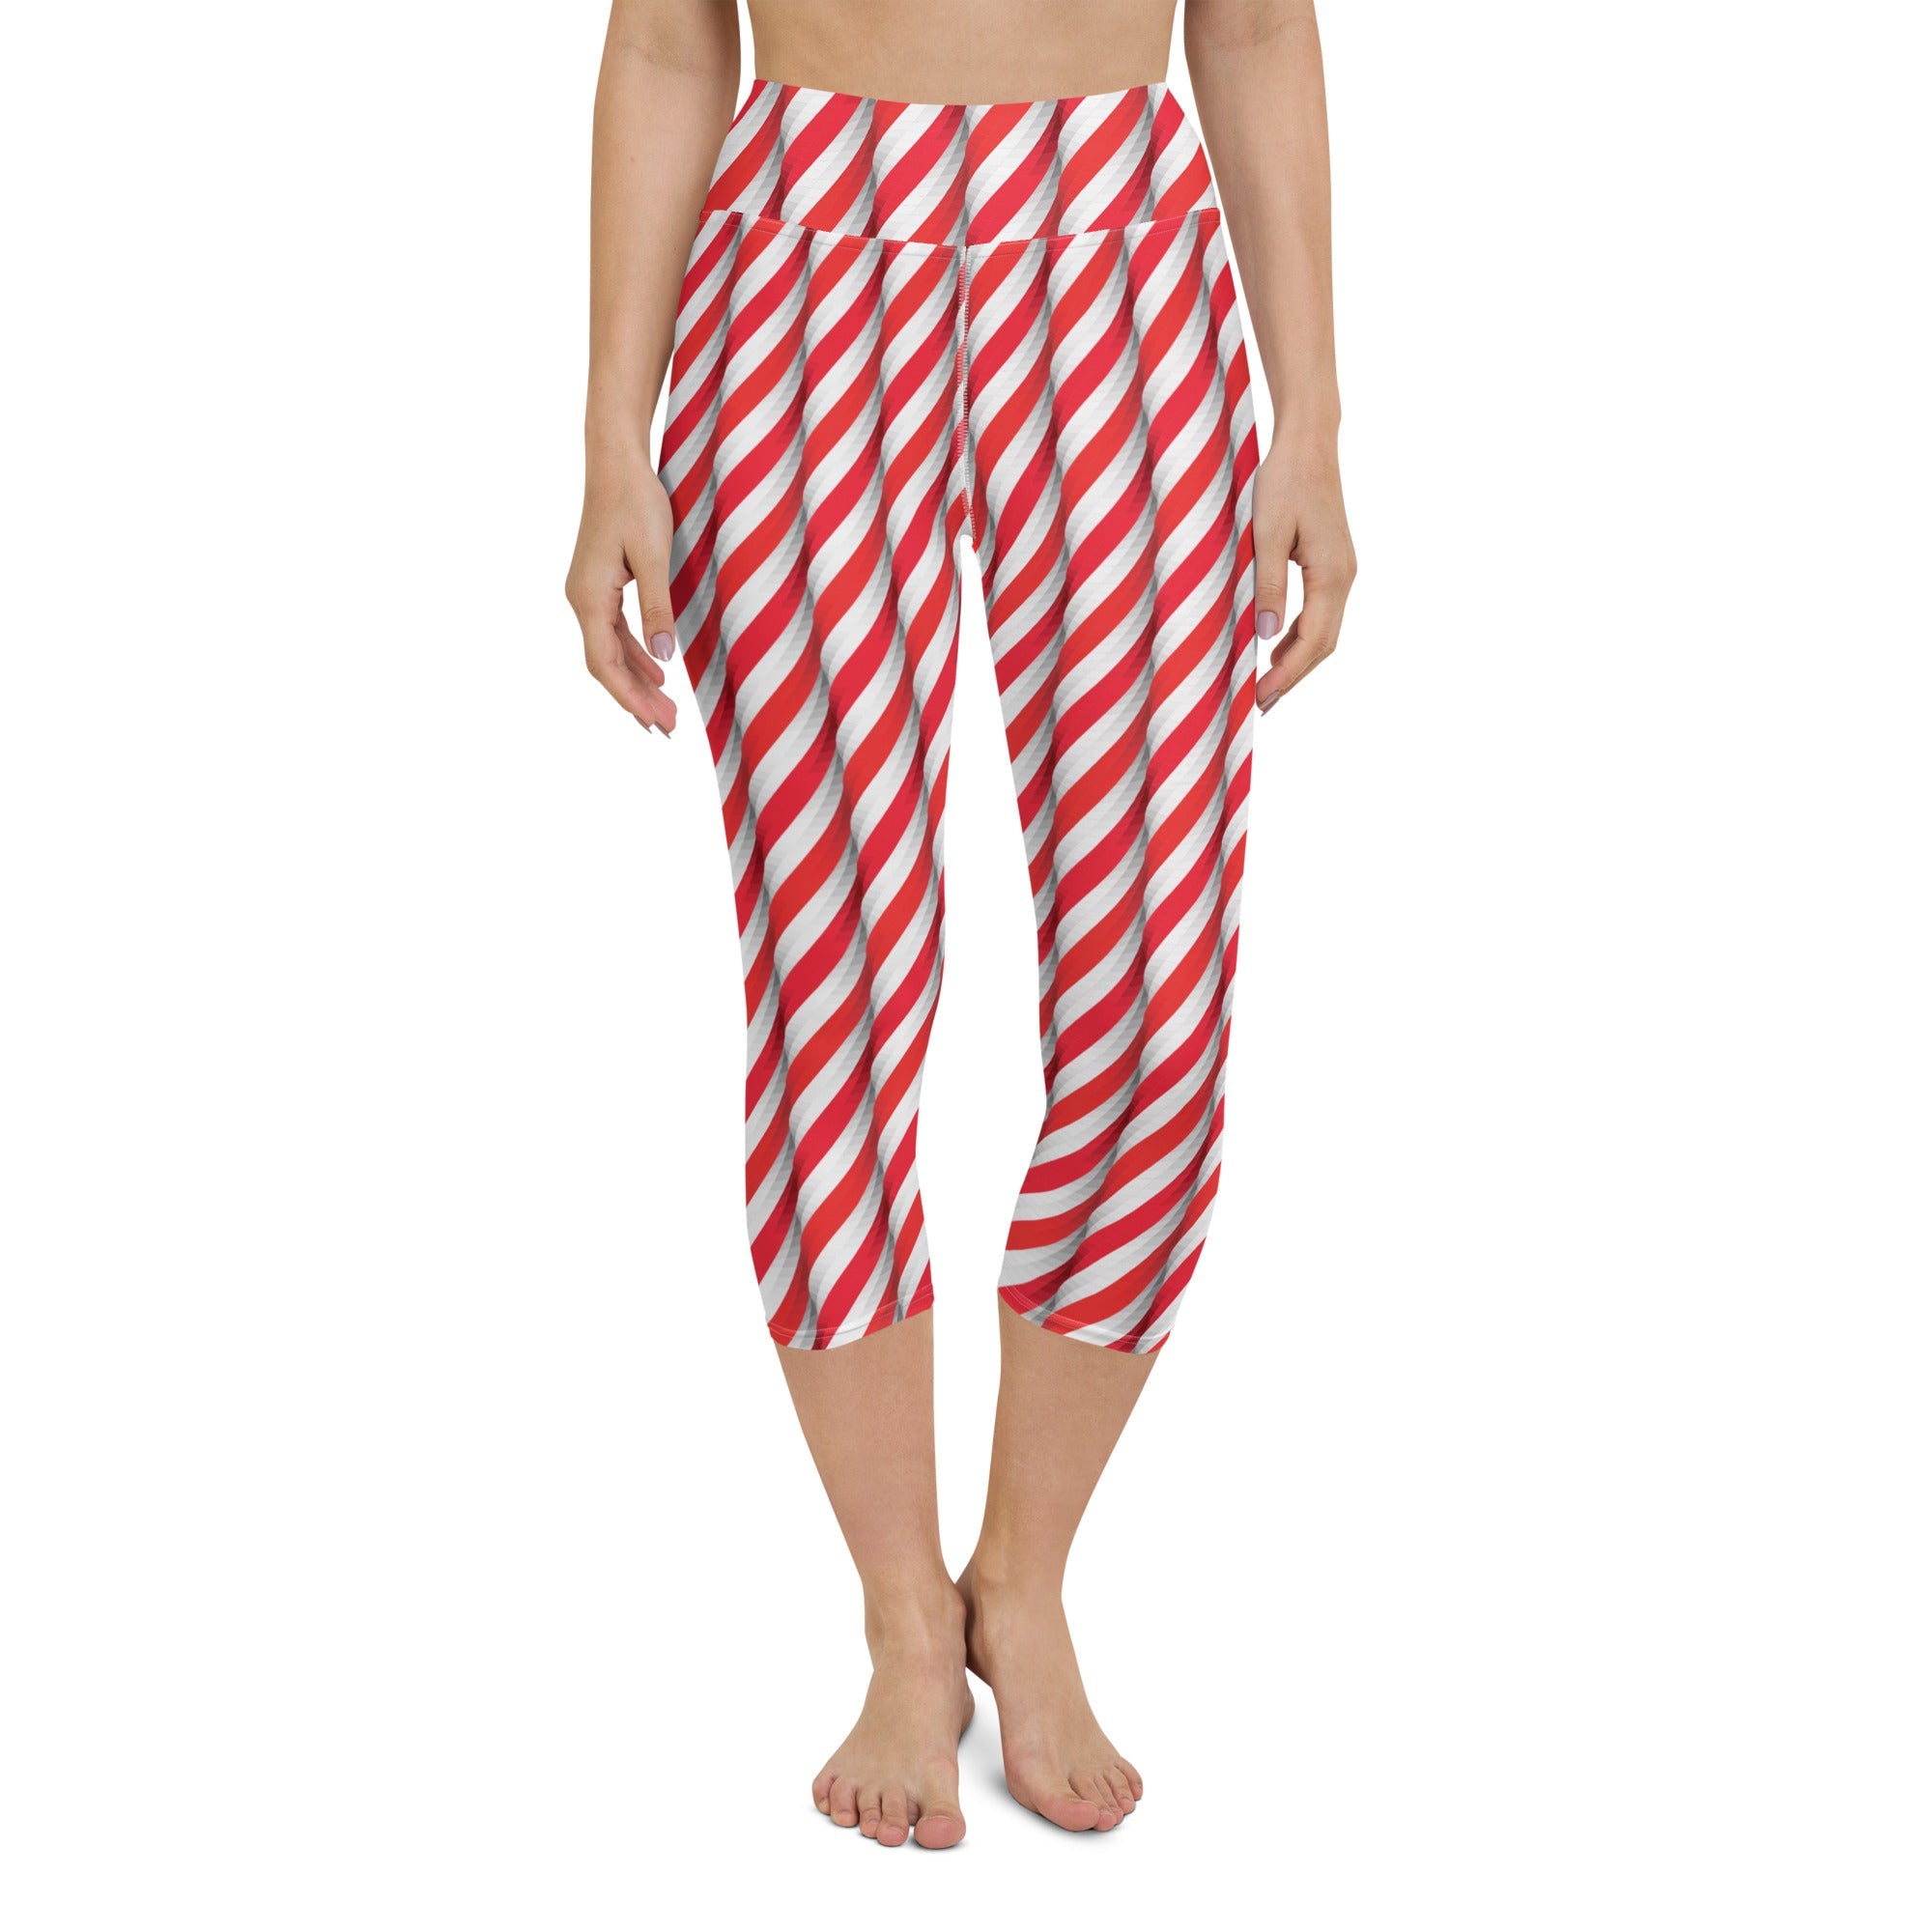 Real Candy Cane Yoga Capris